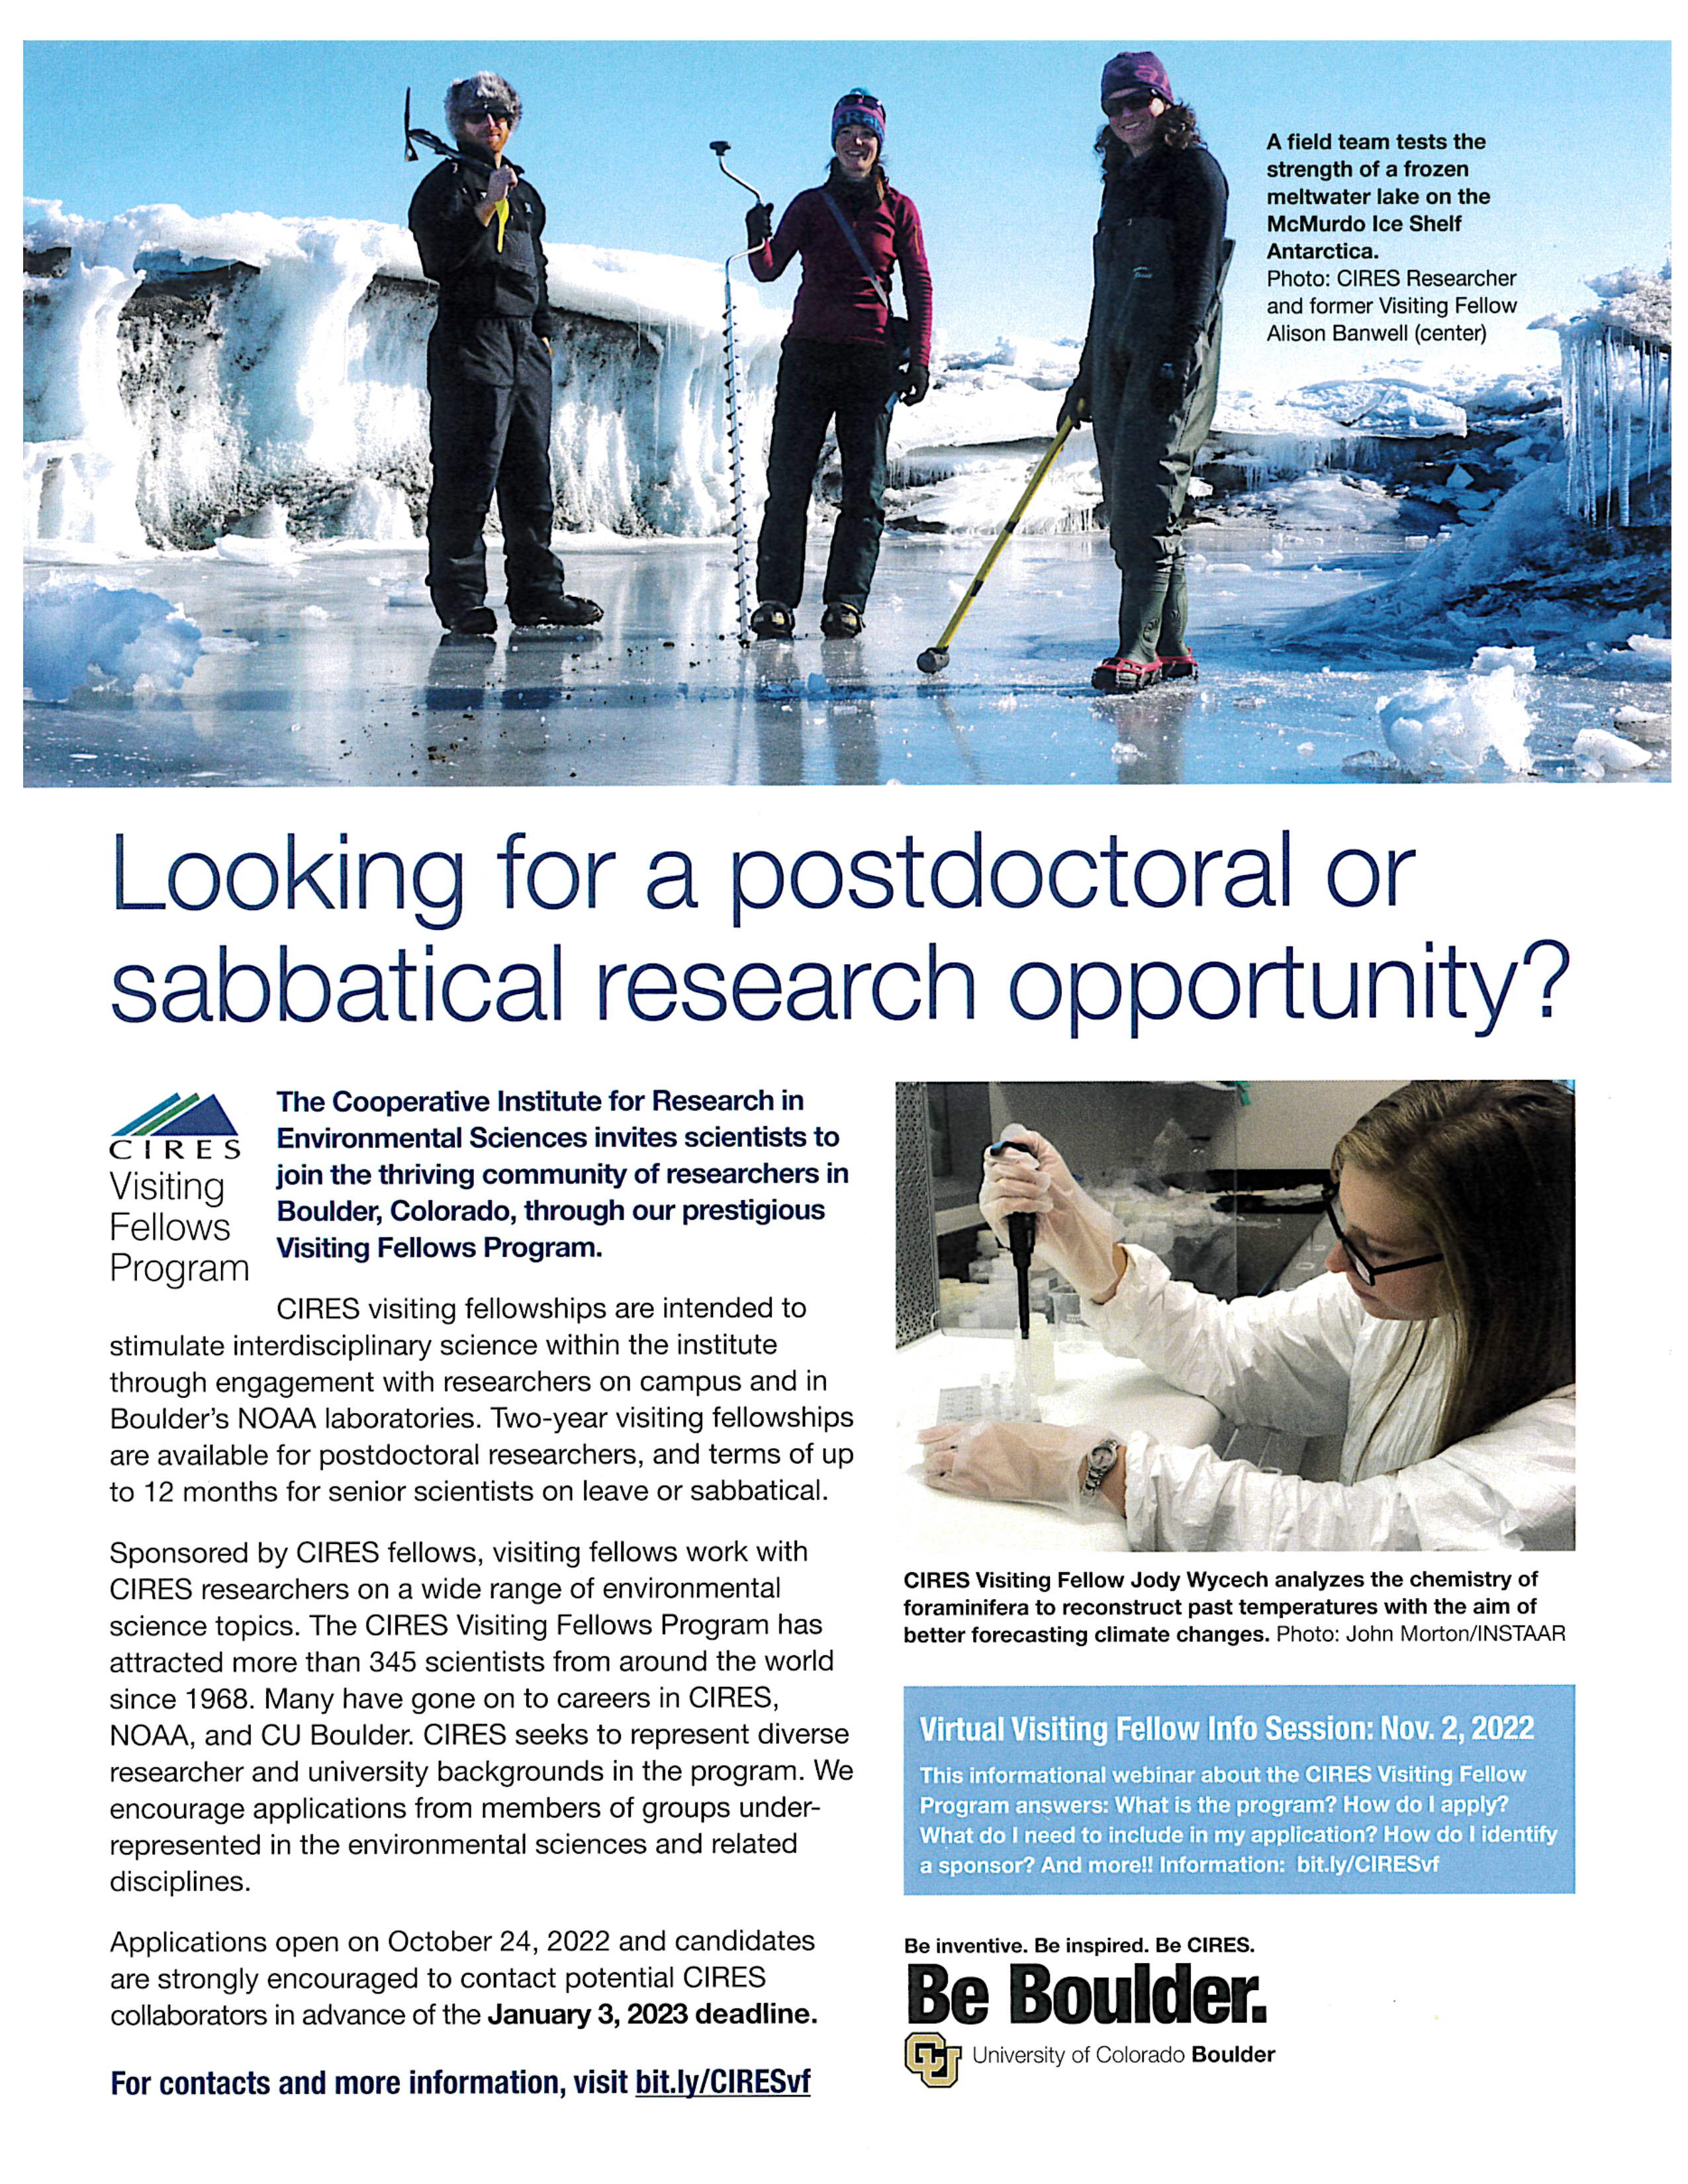 looking_for_a_postdoctoral_or_sabbatical_research_opportunity_flyer.png